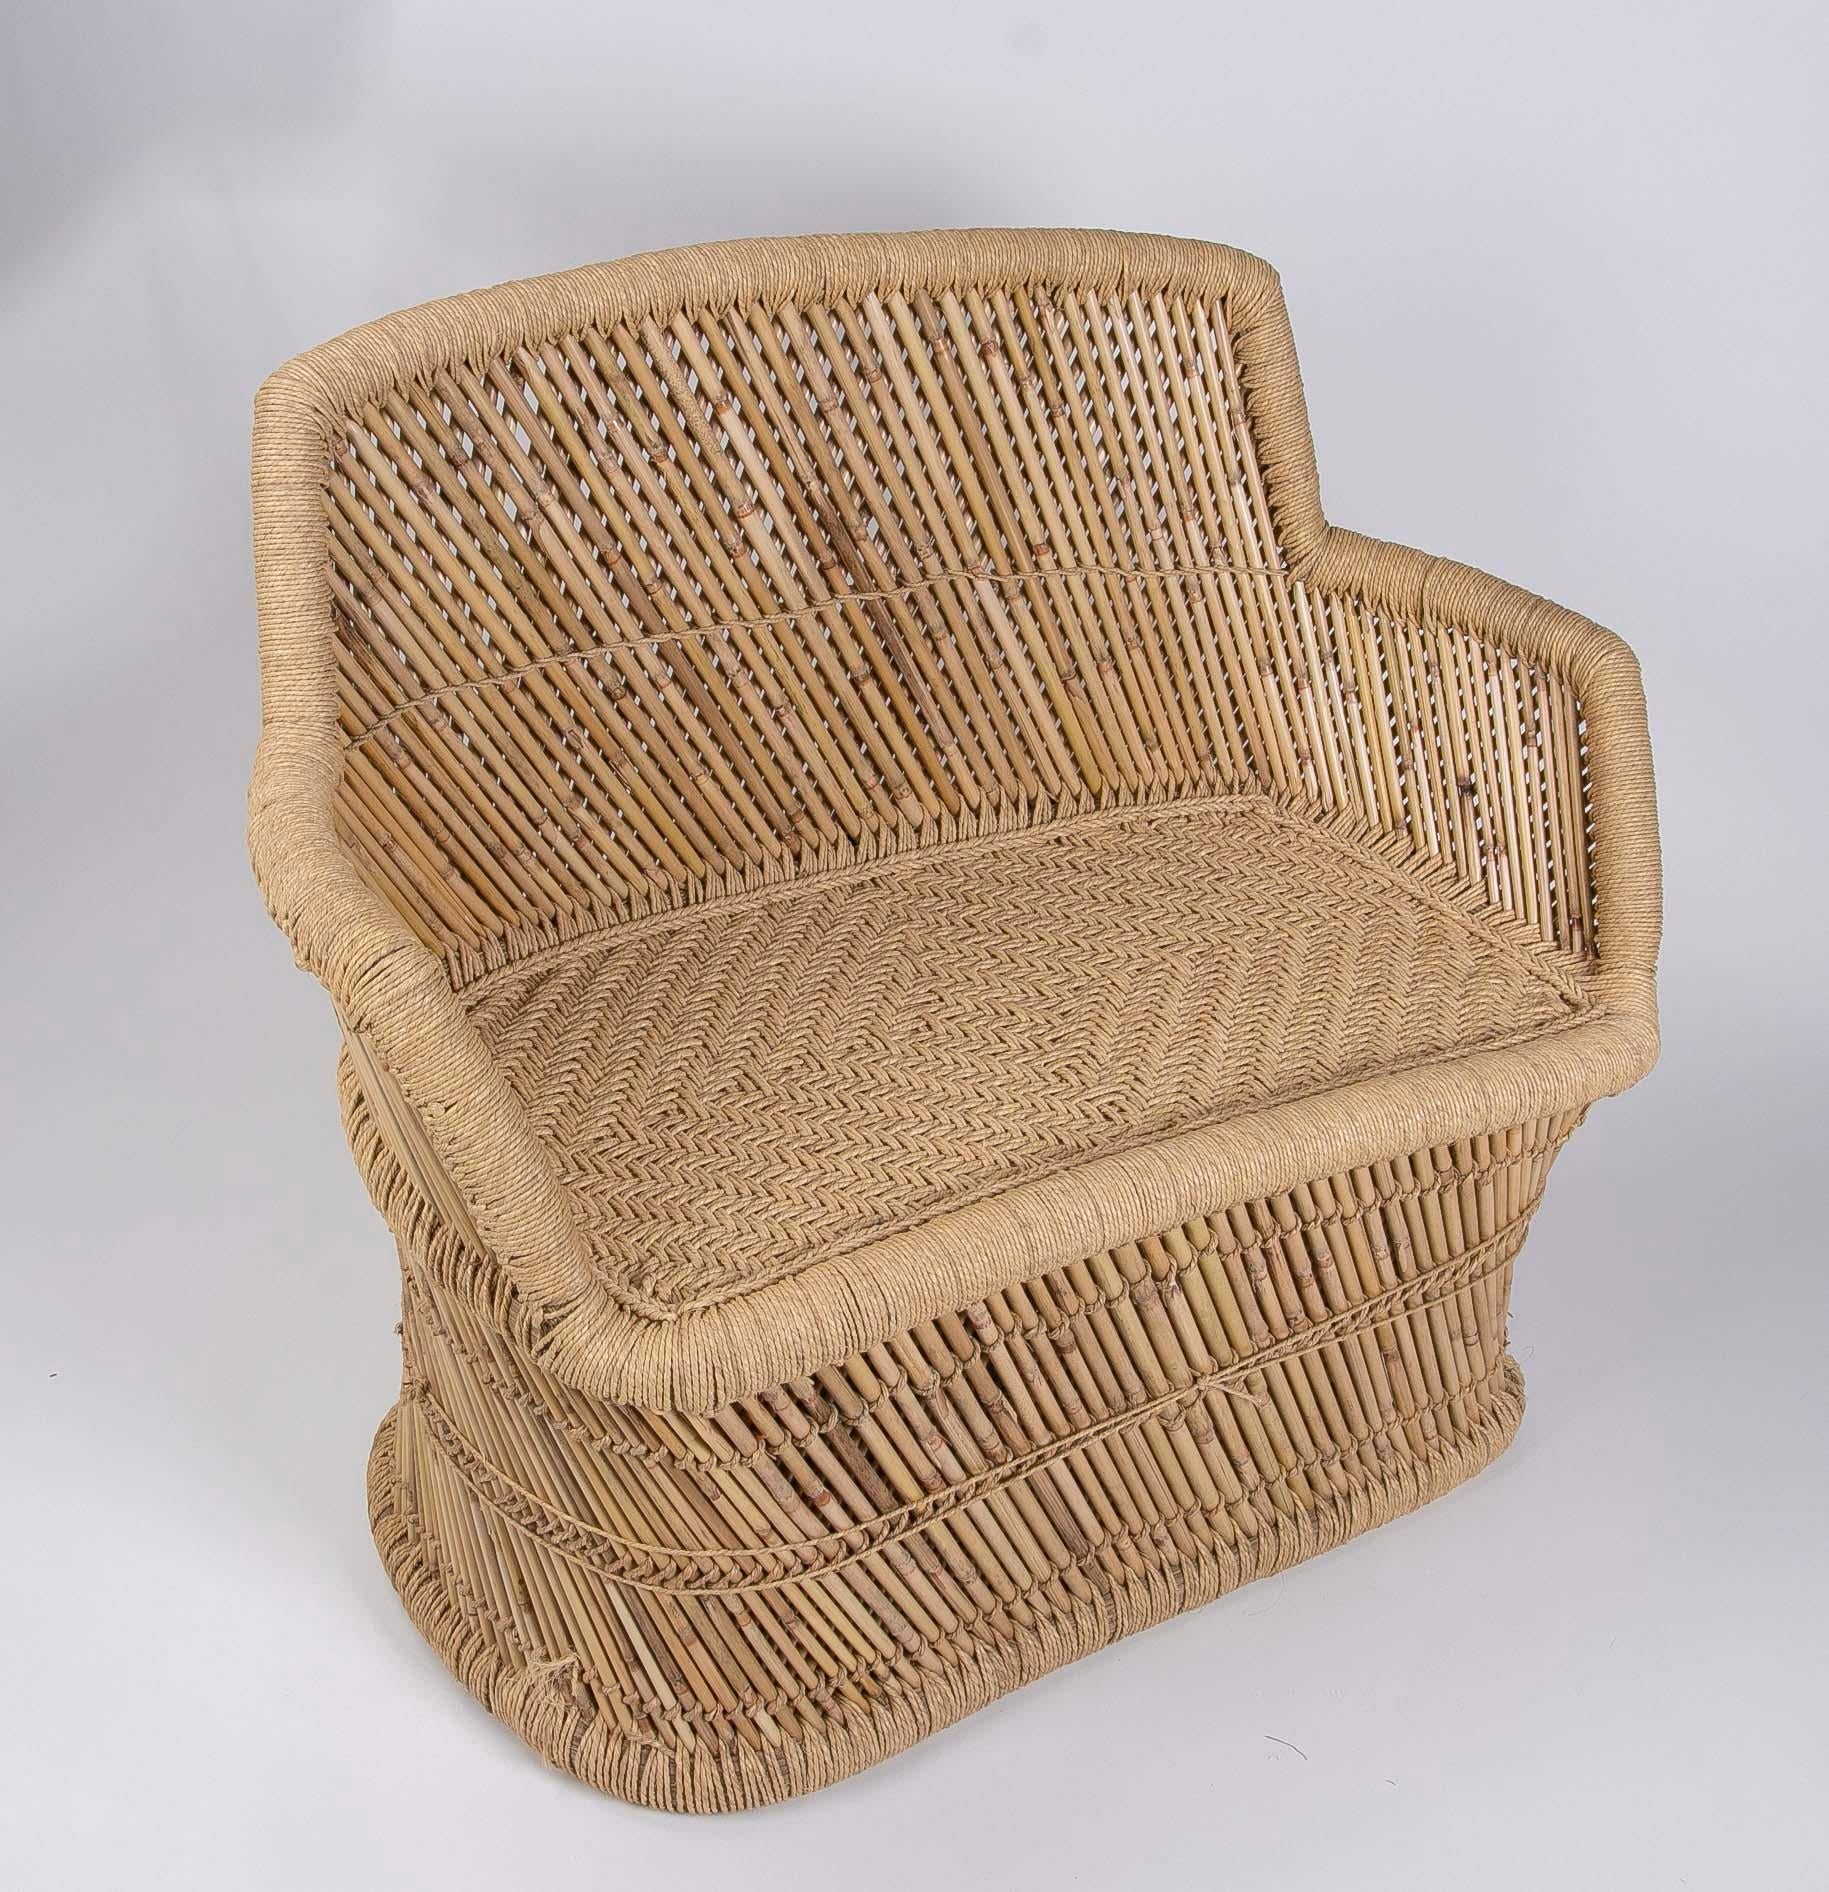  Bamboo and Rope Hand-Stiched  Sofa In Good Condition For Sale In Marbella, ES